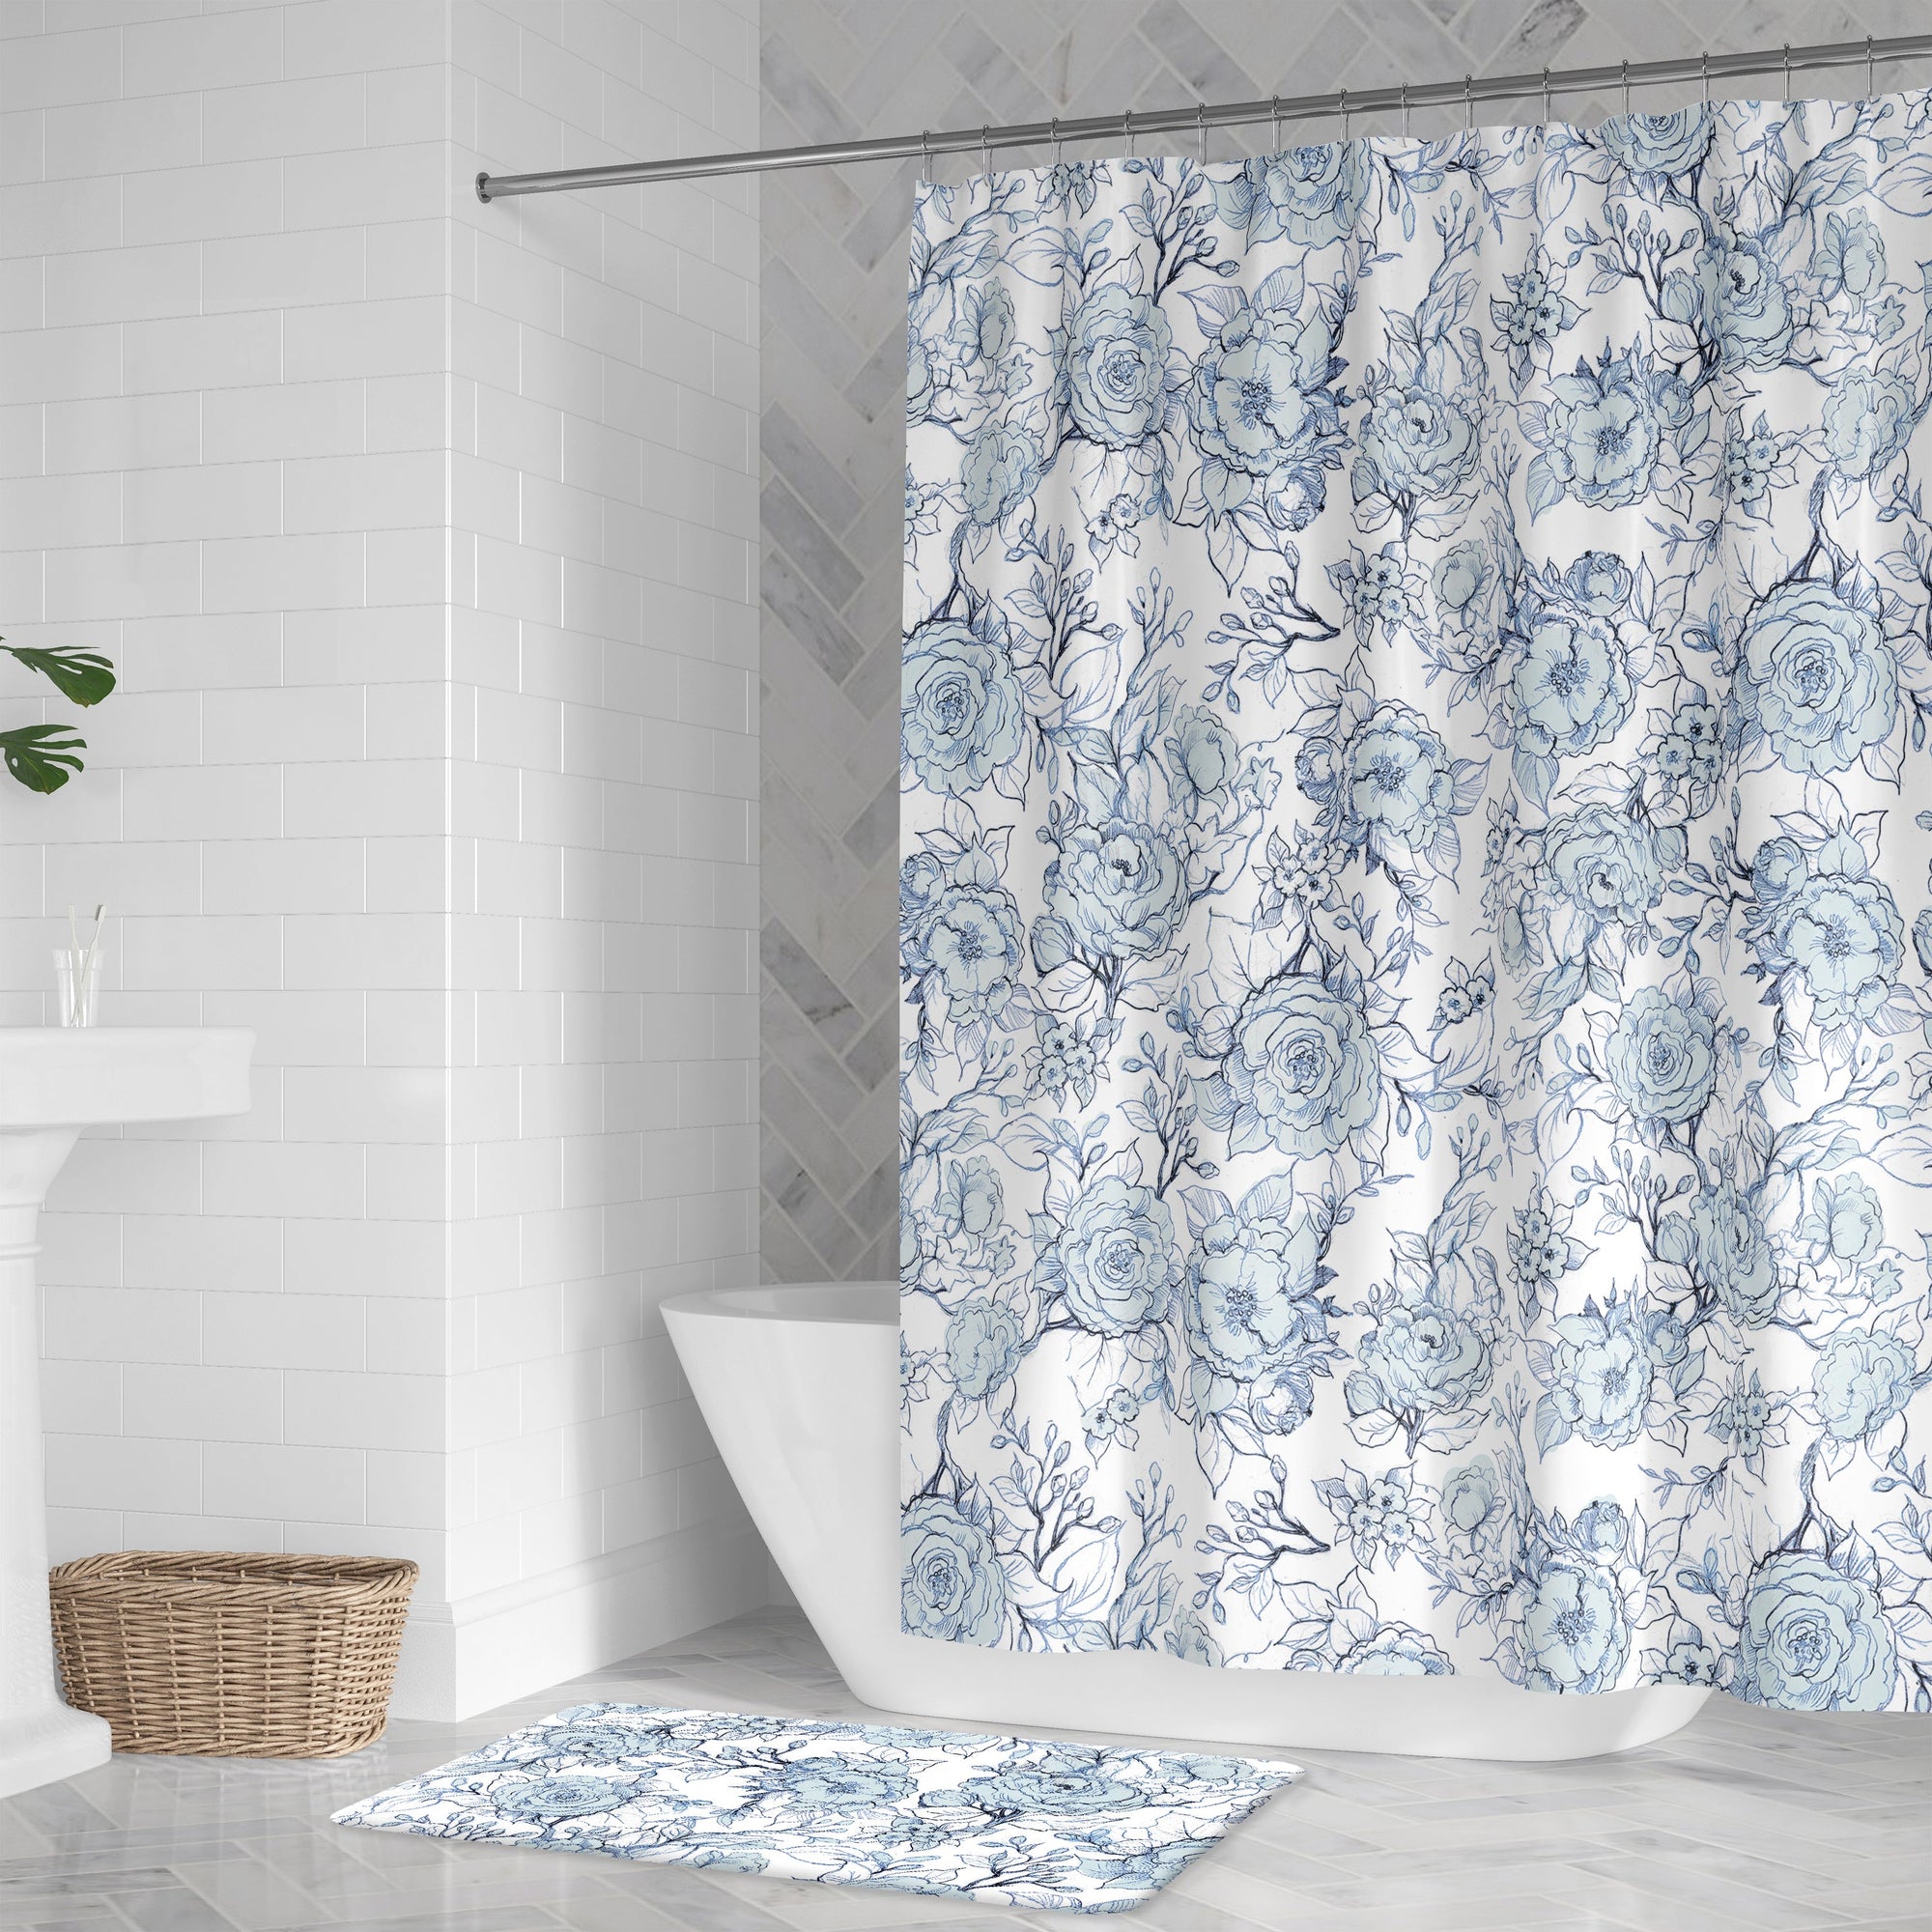 kathy ireland® HOME Floral Toile Shower Curtain